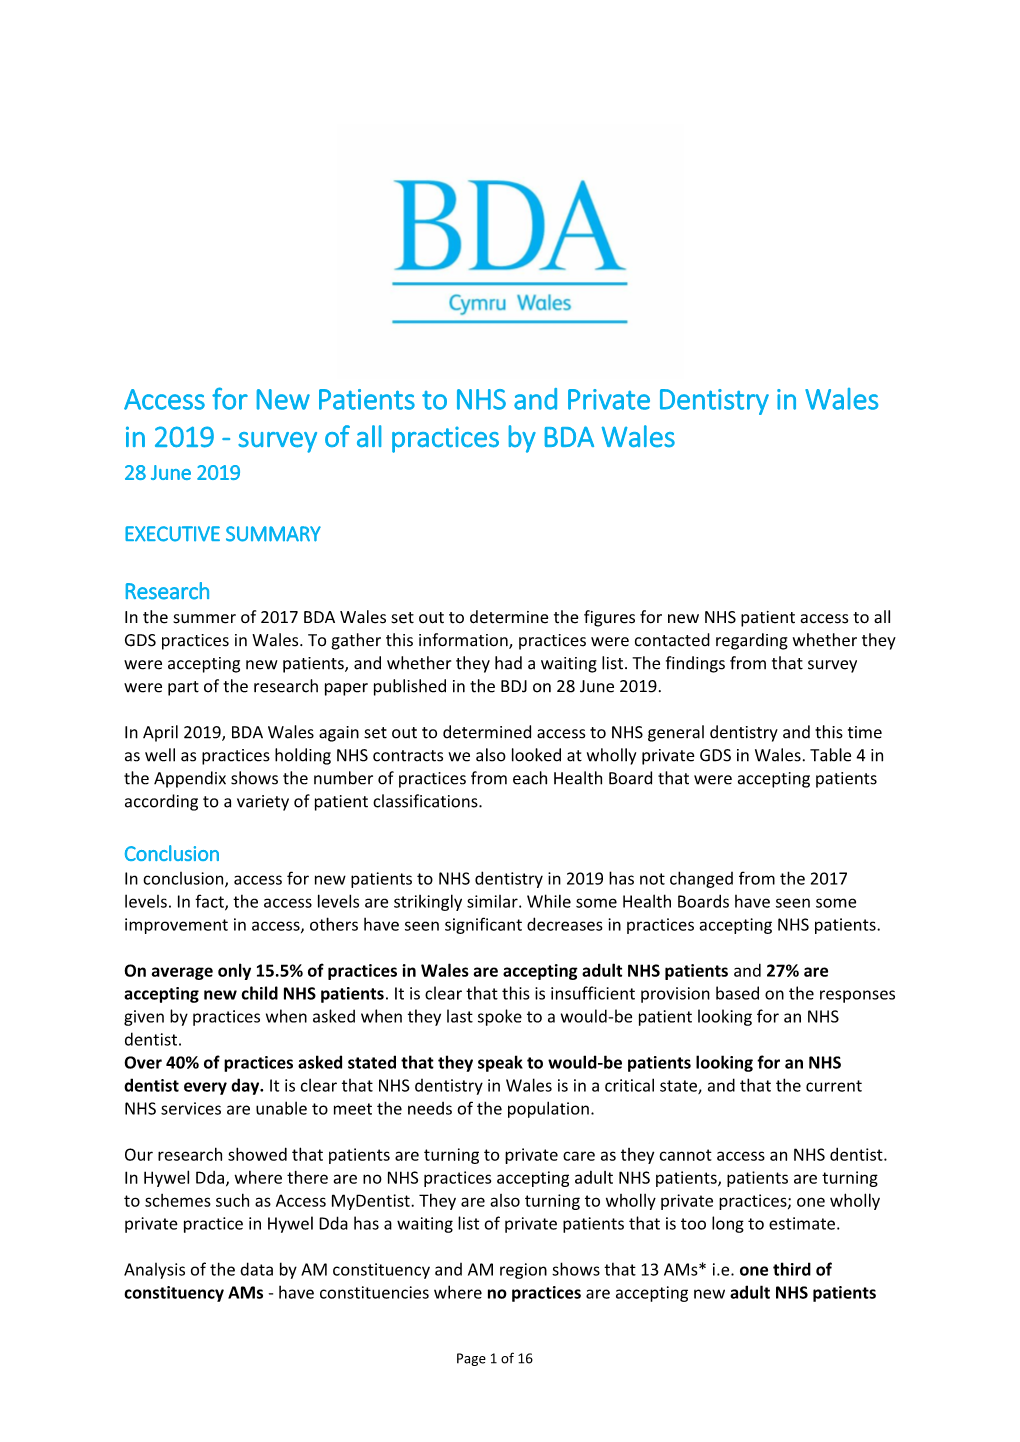 Access for New Patients to NHS and Private Dentistry in Wales in 2019 - Survey of All Practices by BDA Wales 28 June 2019